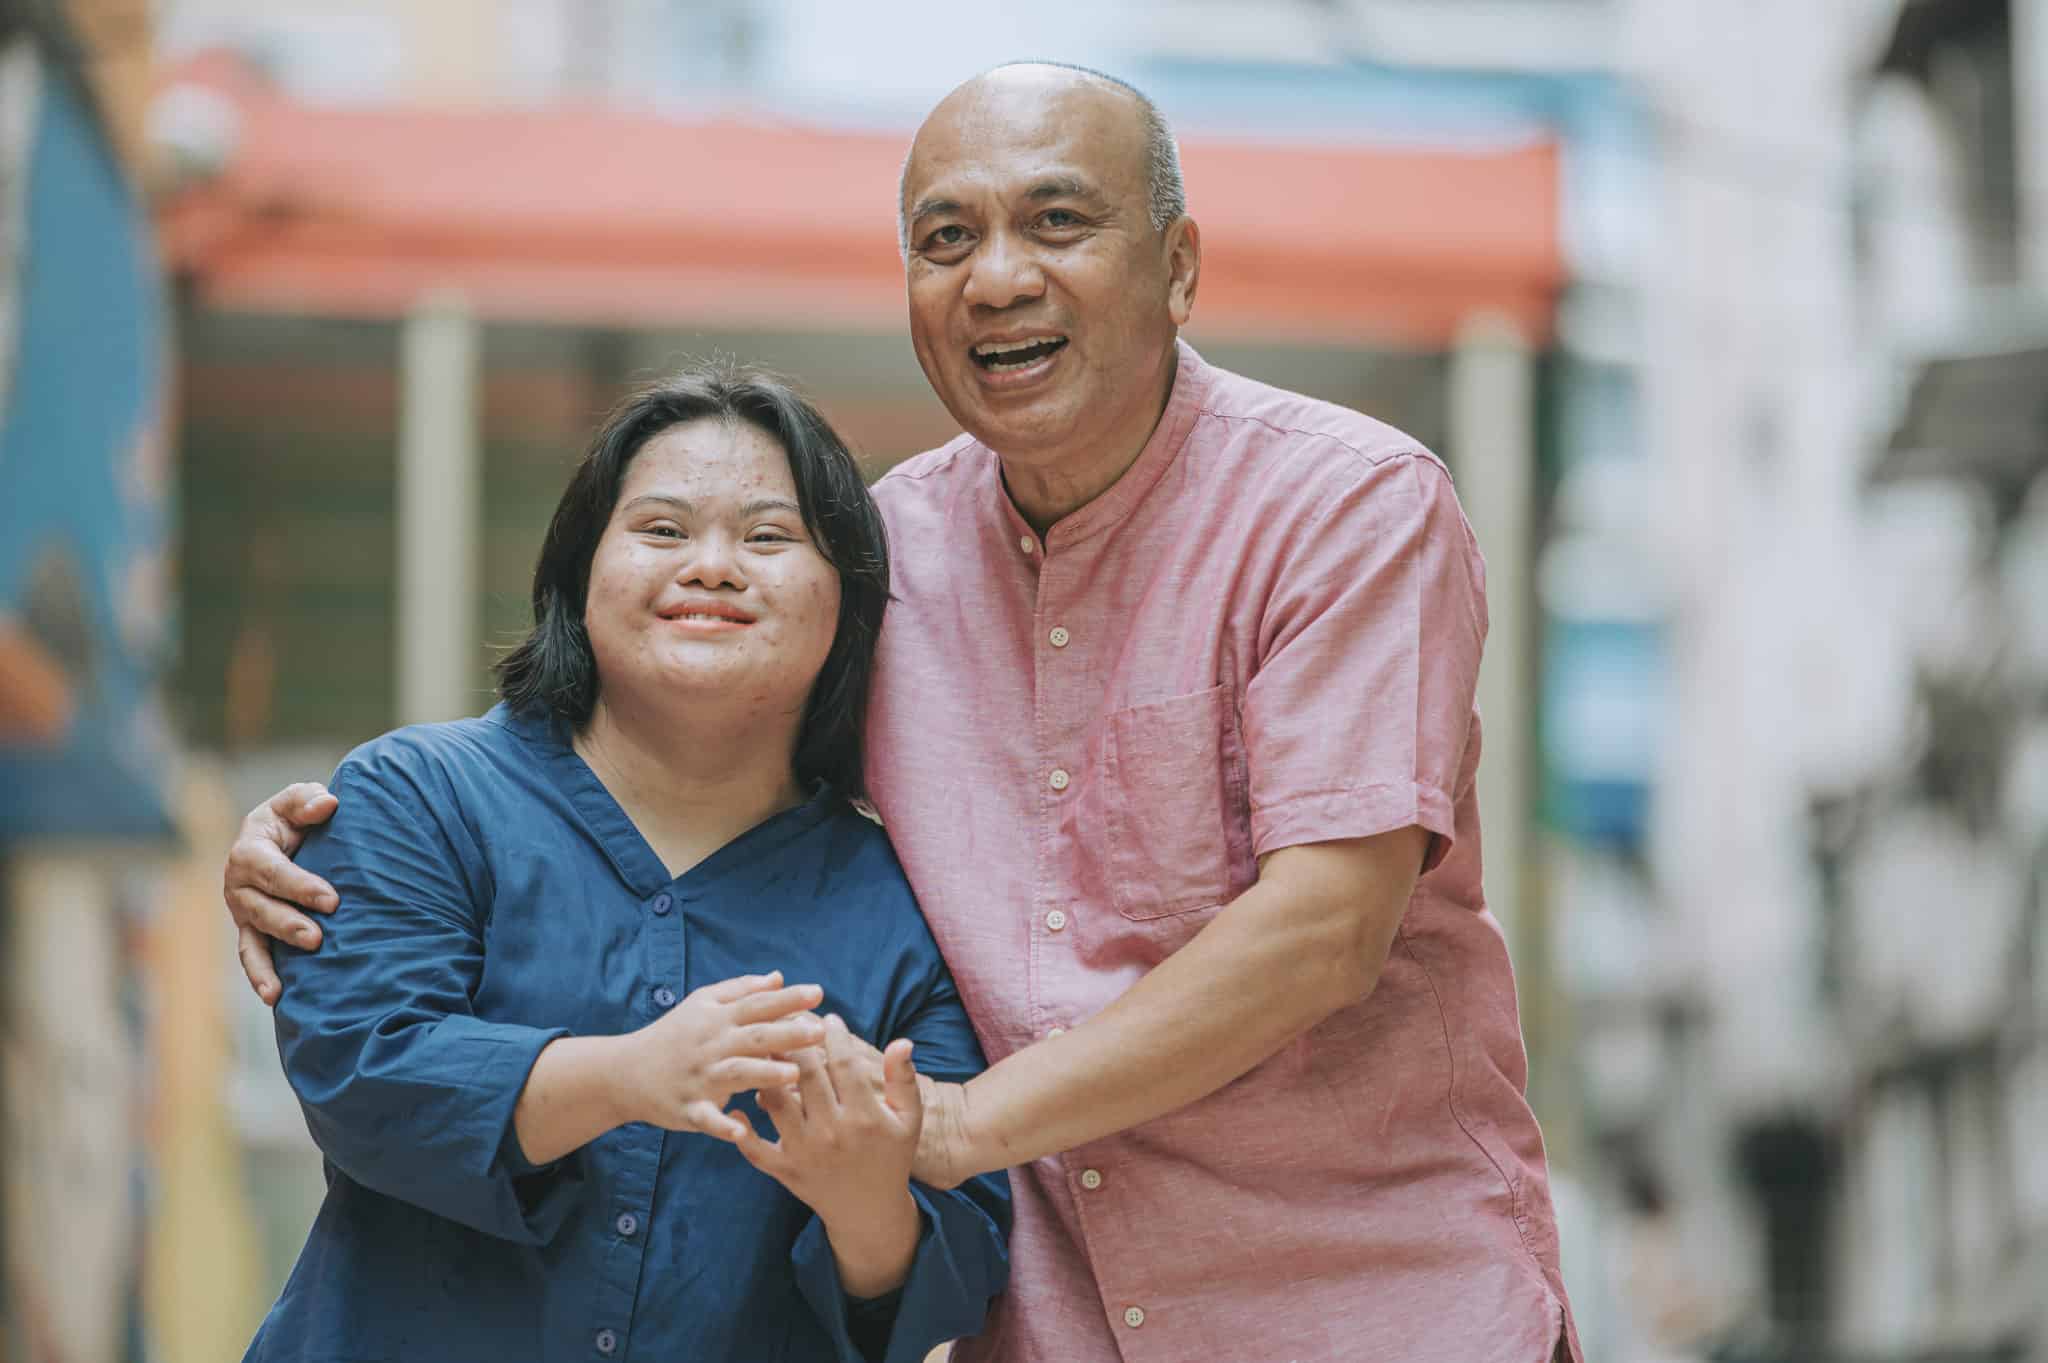 happy asian malay autism down syndrome female  bonding  with her father in city street